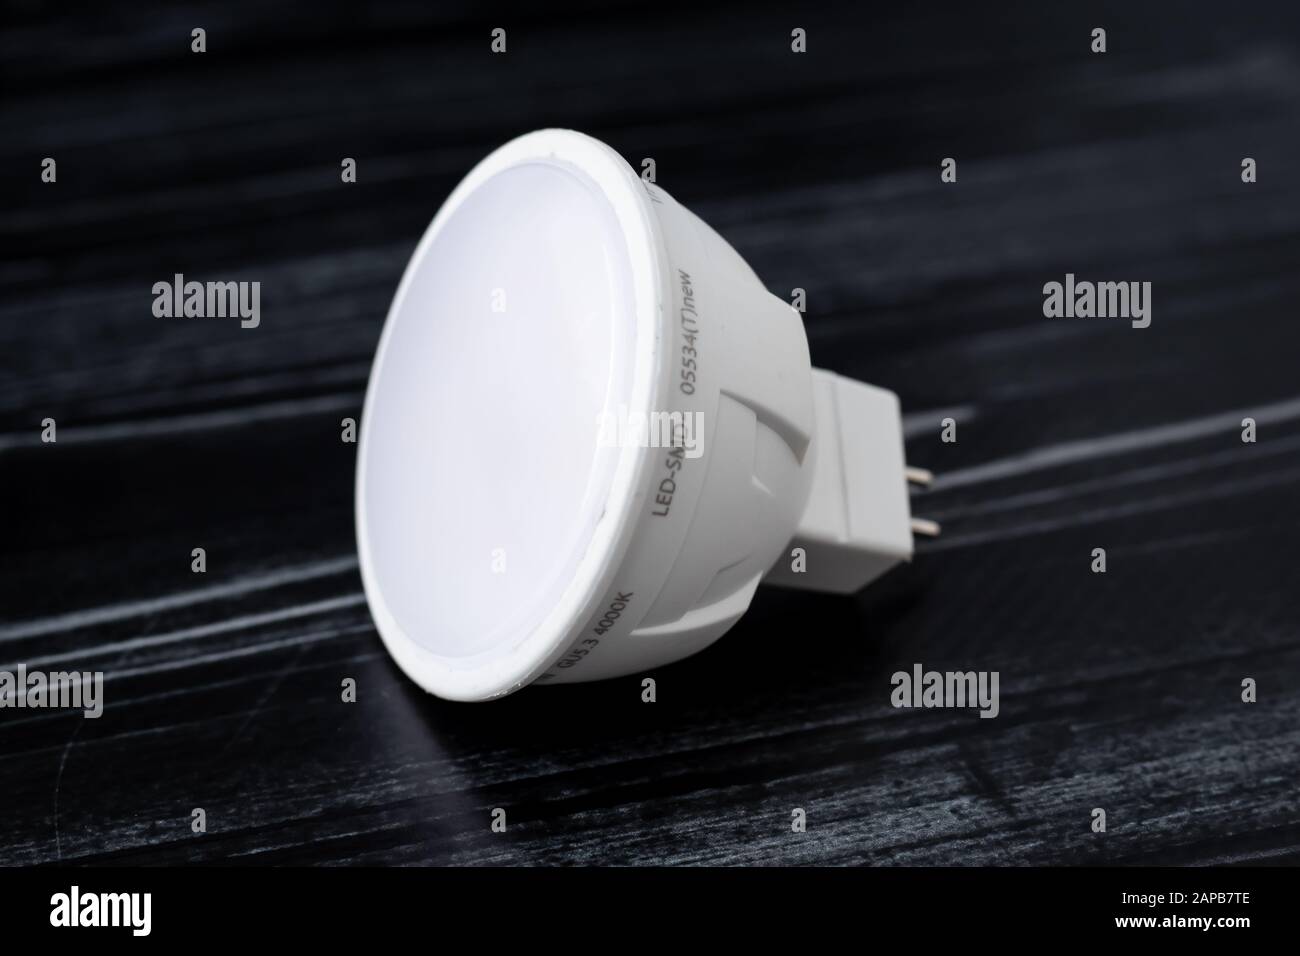 White led lamp on black background. A small diode lamp, gu 5.3 Stock Photo